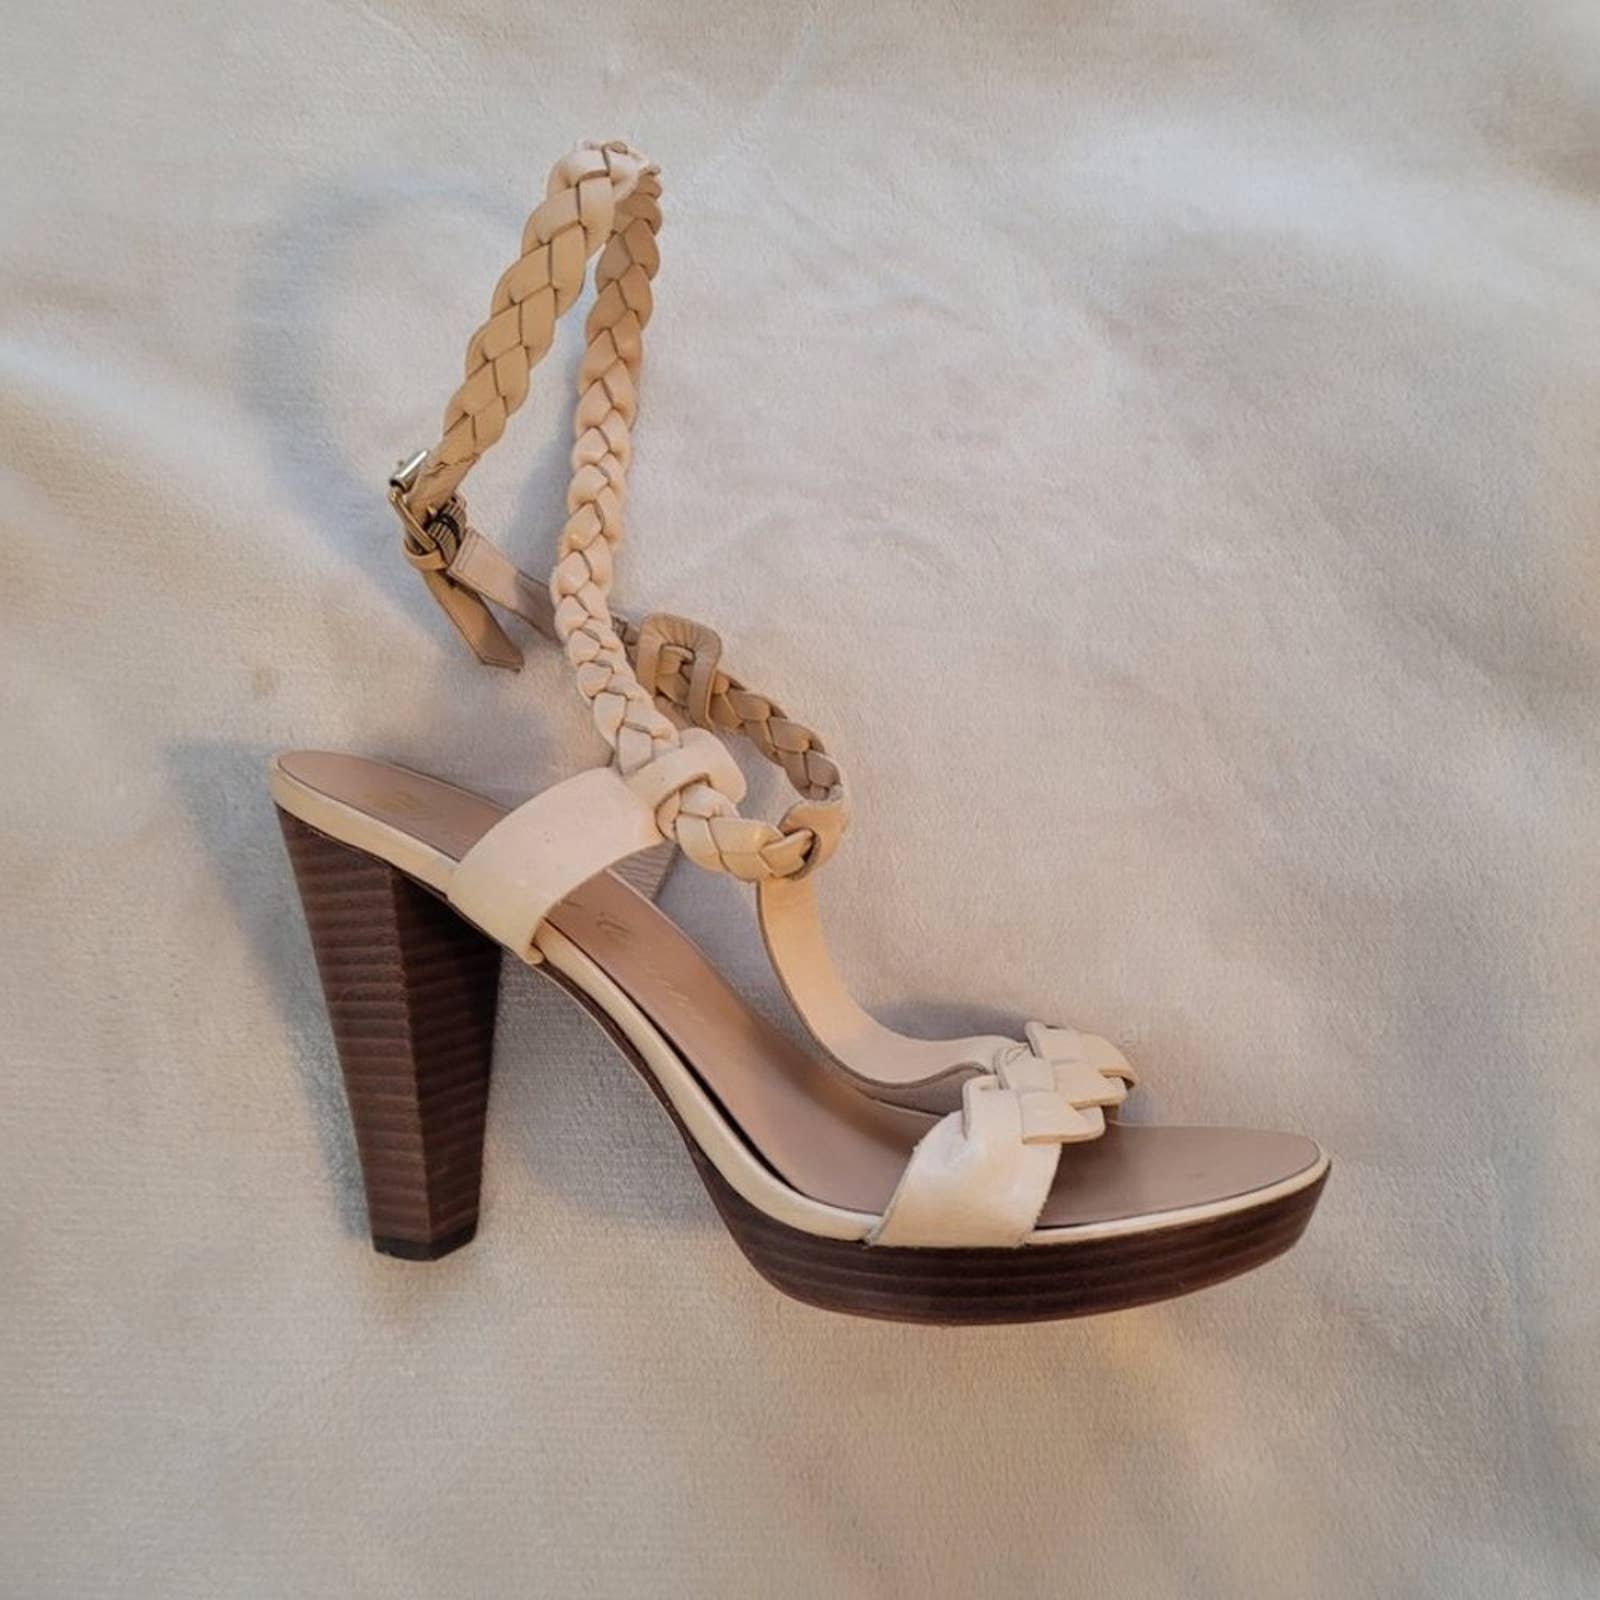 Juicy Couture Double Braided Ankle Leather Sandals - Size 9Markita's ClosetJuicy Couture